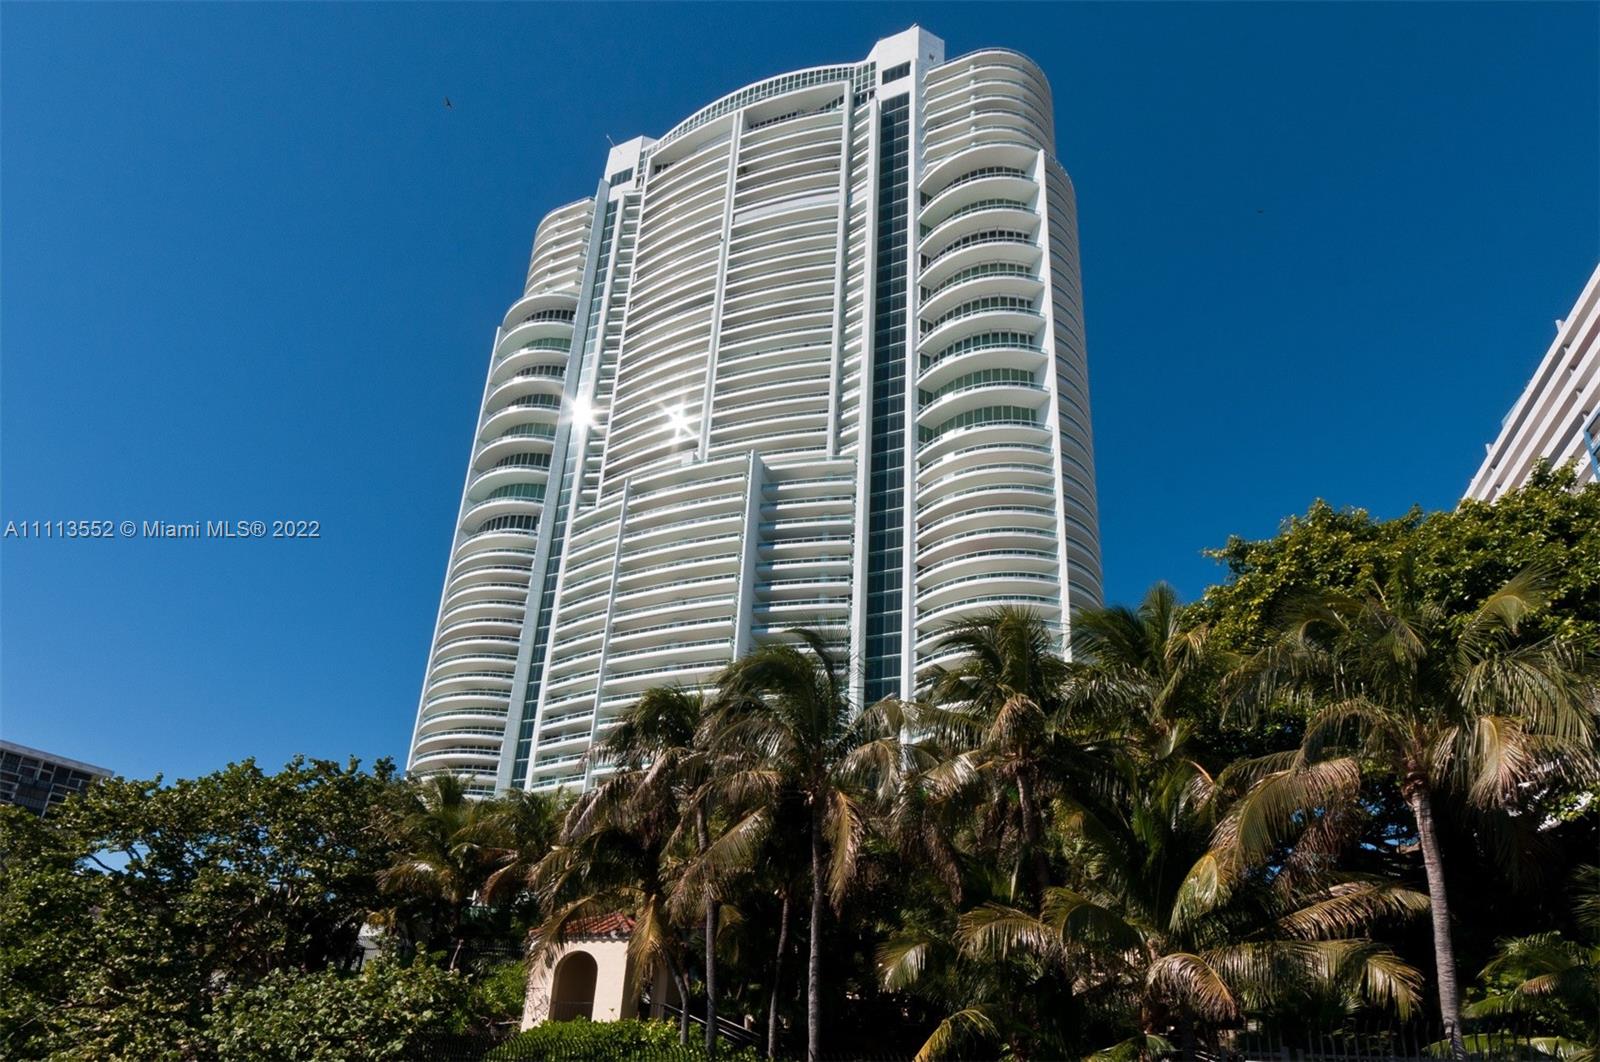 HIGH IN THE SKY, THIS IMPECCABLE FLOW-THROUGH RESIDENCE ON THE 35TH FLOOR OFFERS OCEAN AND CITY SKYLINE VIEWS.  ALSO FEATURING A FANTASTIC LAYOUT, 4,030 SQFT OF LIVING AREA, PRIVATE ELEVATOR FOYER, 4 BEDS & 5.5 BATHS, DISTRIBUTION HALL THAT SEPARATES SOCIAL AREAS FROM PRIVATE ONES, MARBLE FLOORS IN SOCIAL AREAS, HUGE WALK-IN CLOSETS IN MASTER BEDROOM, ITALIAN SNAIDERO KITCHEN WITH TOP OF THE LINE APPLIANCES, ELECTRIC WINDOW TREATMENTS, MAID’S QUARTERS WITH FULL BATHROOM, 2 EXPANSIVE TERRACES WITH PANORAMIC VIEWS OF THE ATLANTIC OCEAN, BISCAYNE BAY & MIAMI SKYLINE. SANTA MARIA’S DISTINCTIVE LIFESTYLE WITH OUTSTANDING AMENITIES MAKES LIVING HERE THE BEST CHOICE IN SOUTH FLORIDA.